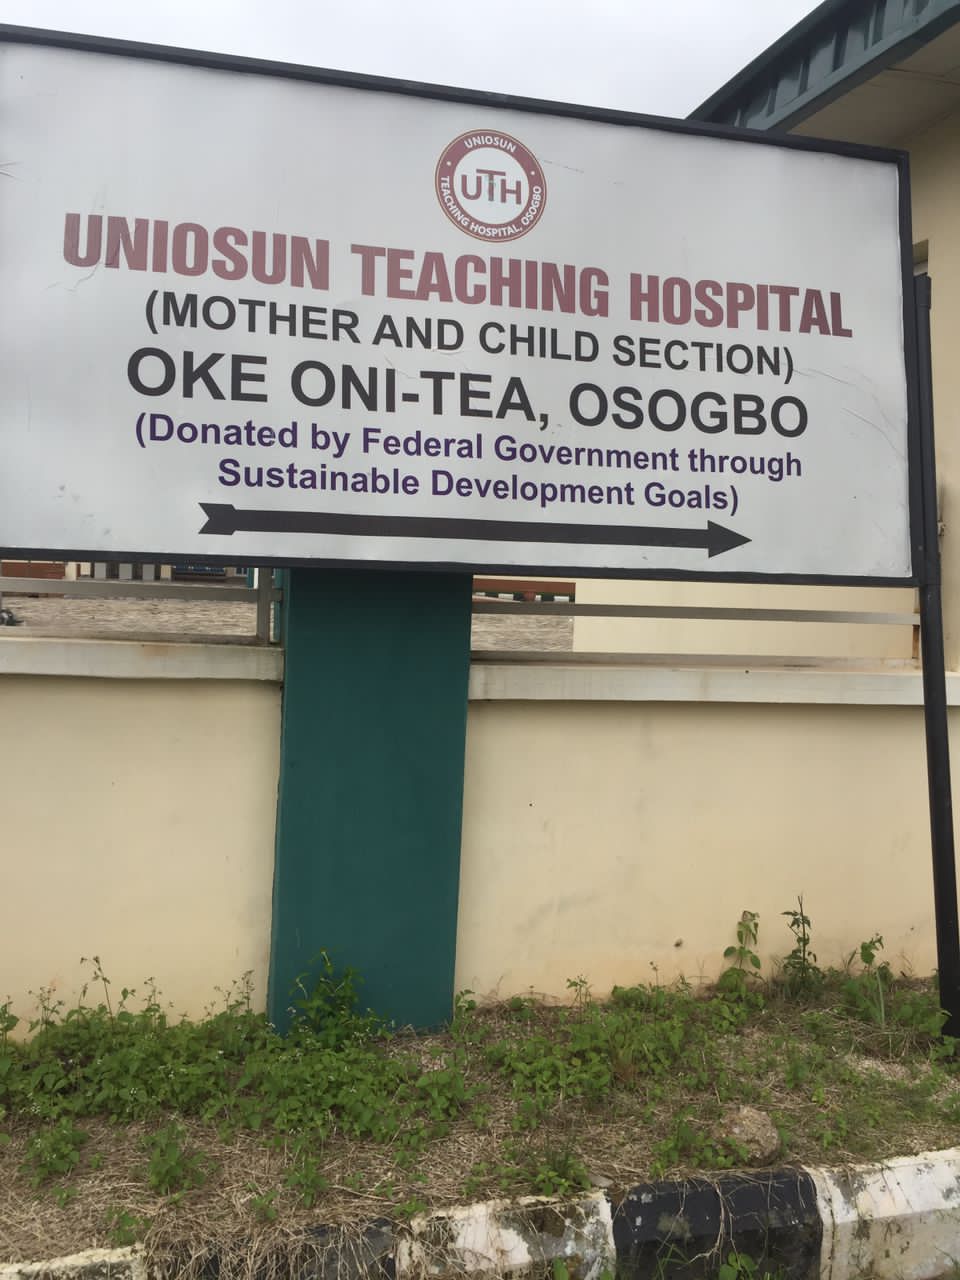 A signage indicating that the 100-bed is under UTH management. Credit: LAWAL Sofiyyat Bolanle, PEN PRESS